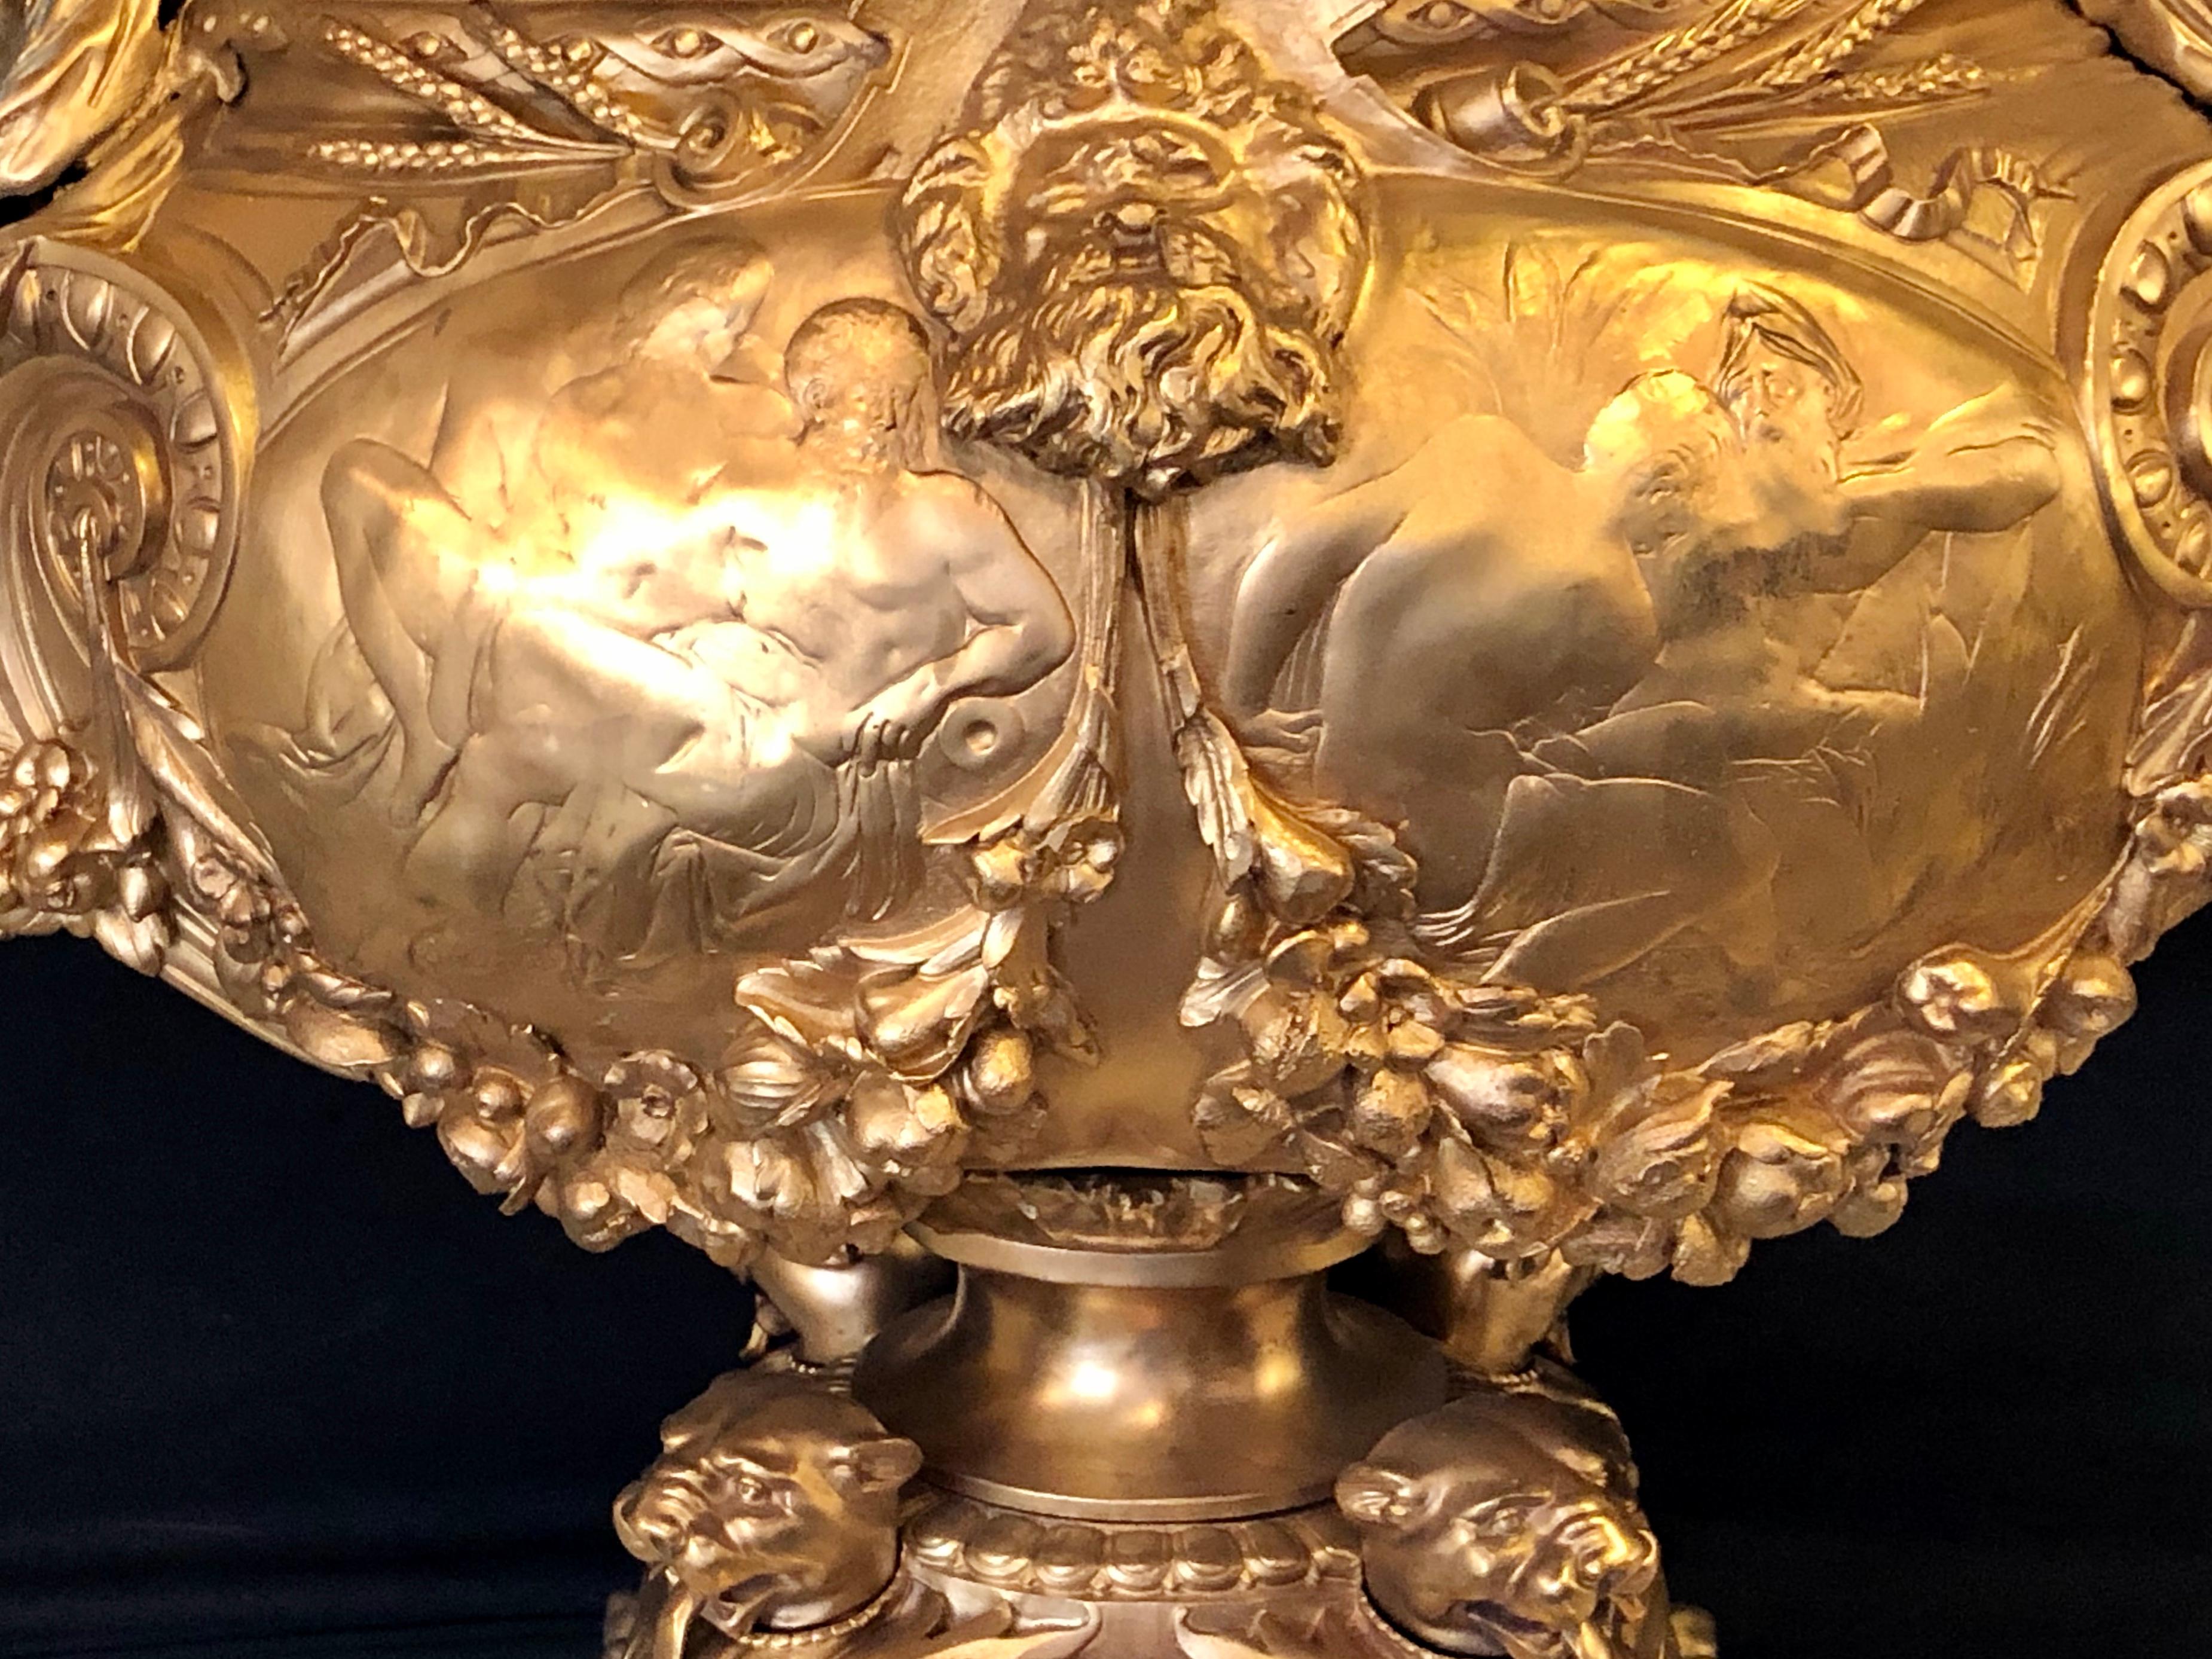 Bronze Louis XV style centerpiece, flowerpot, planter or jardinière. Seated with flaking maidens. This large and impressive centerpiece depicts a pair of seated full bodied maidens on each side of the open center pot with garland and floral design.